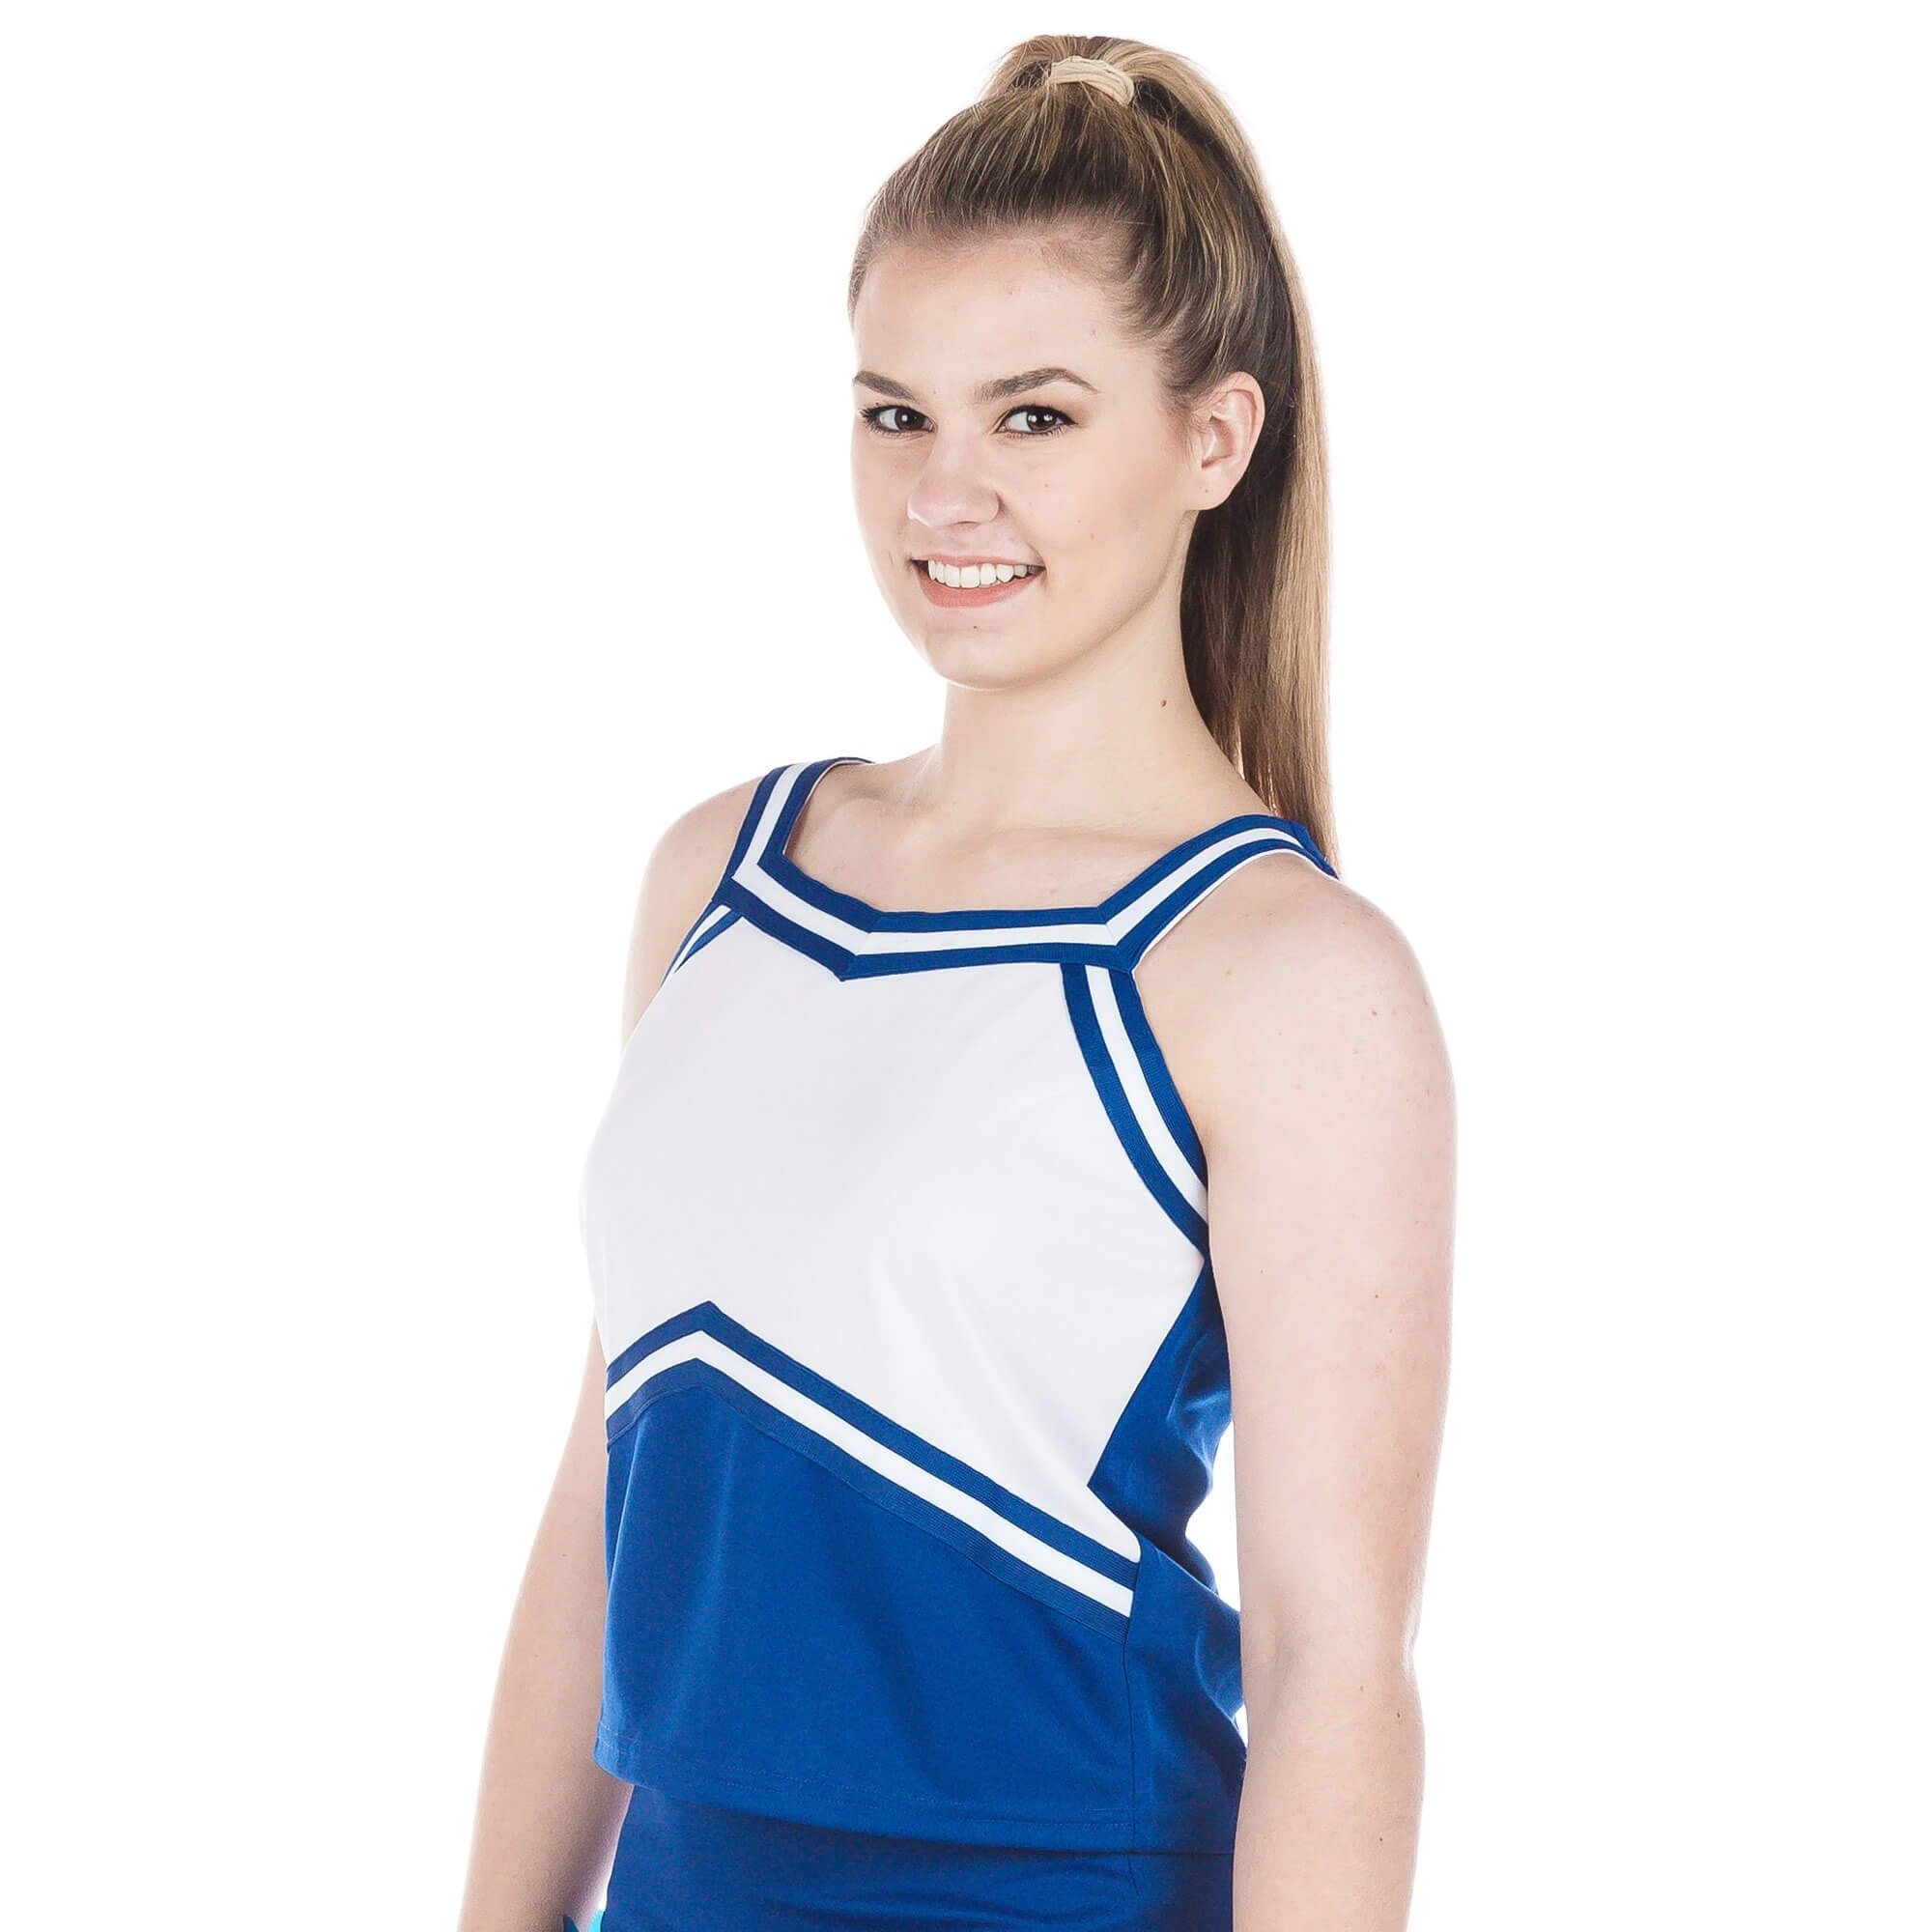 Danzcue Adult Sweetheart Cheerleaders Uniform Shell Top - Click Image to Close